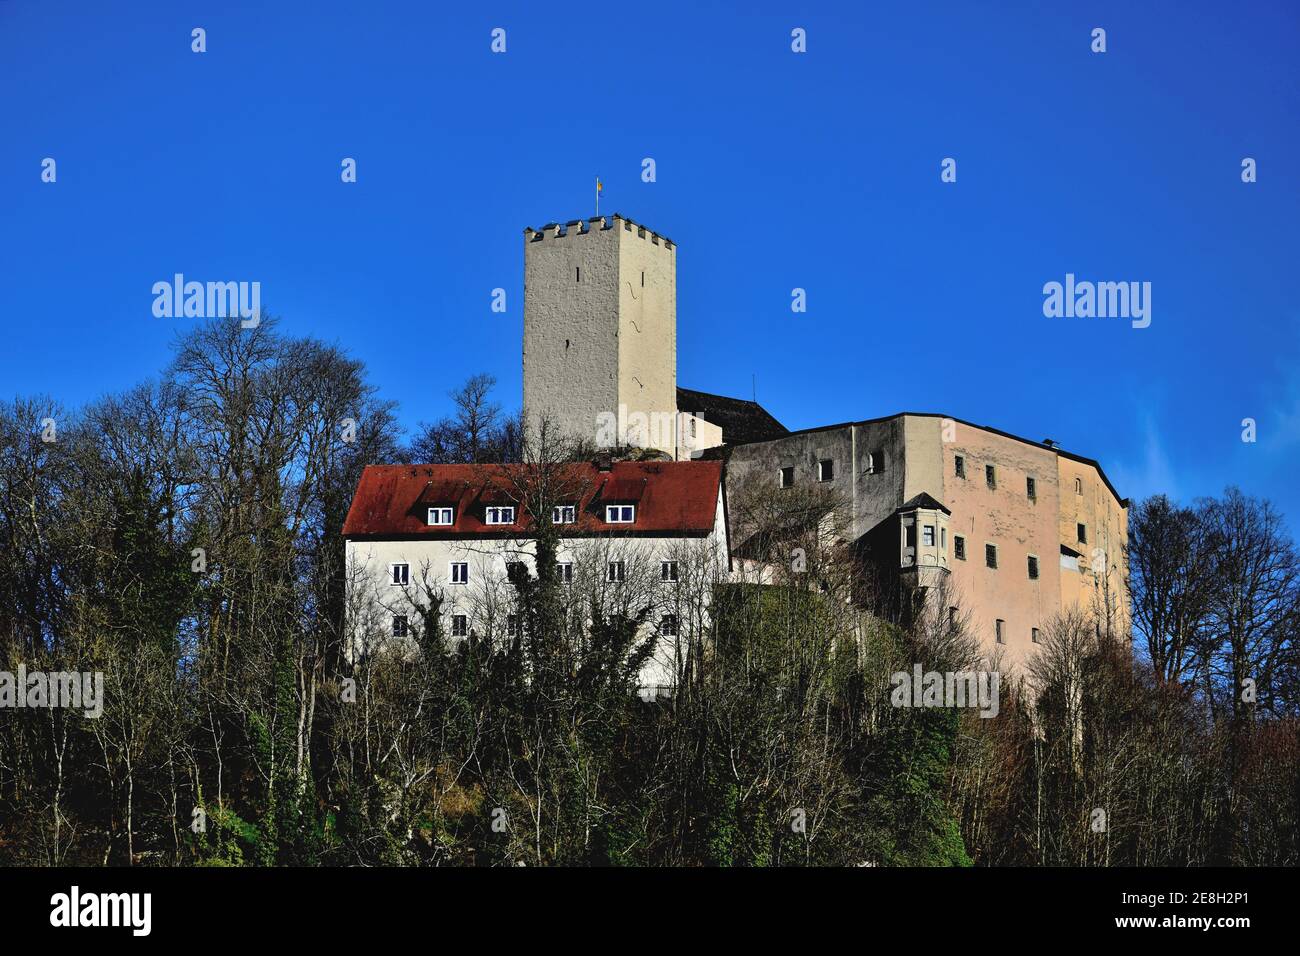 The fortress of Falkenstein, a landmark in the district of Cham, Upper Palatinate, Bavaria, Germany.. Stock Photo